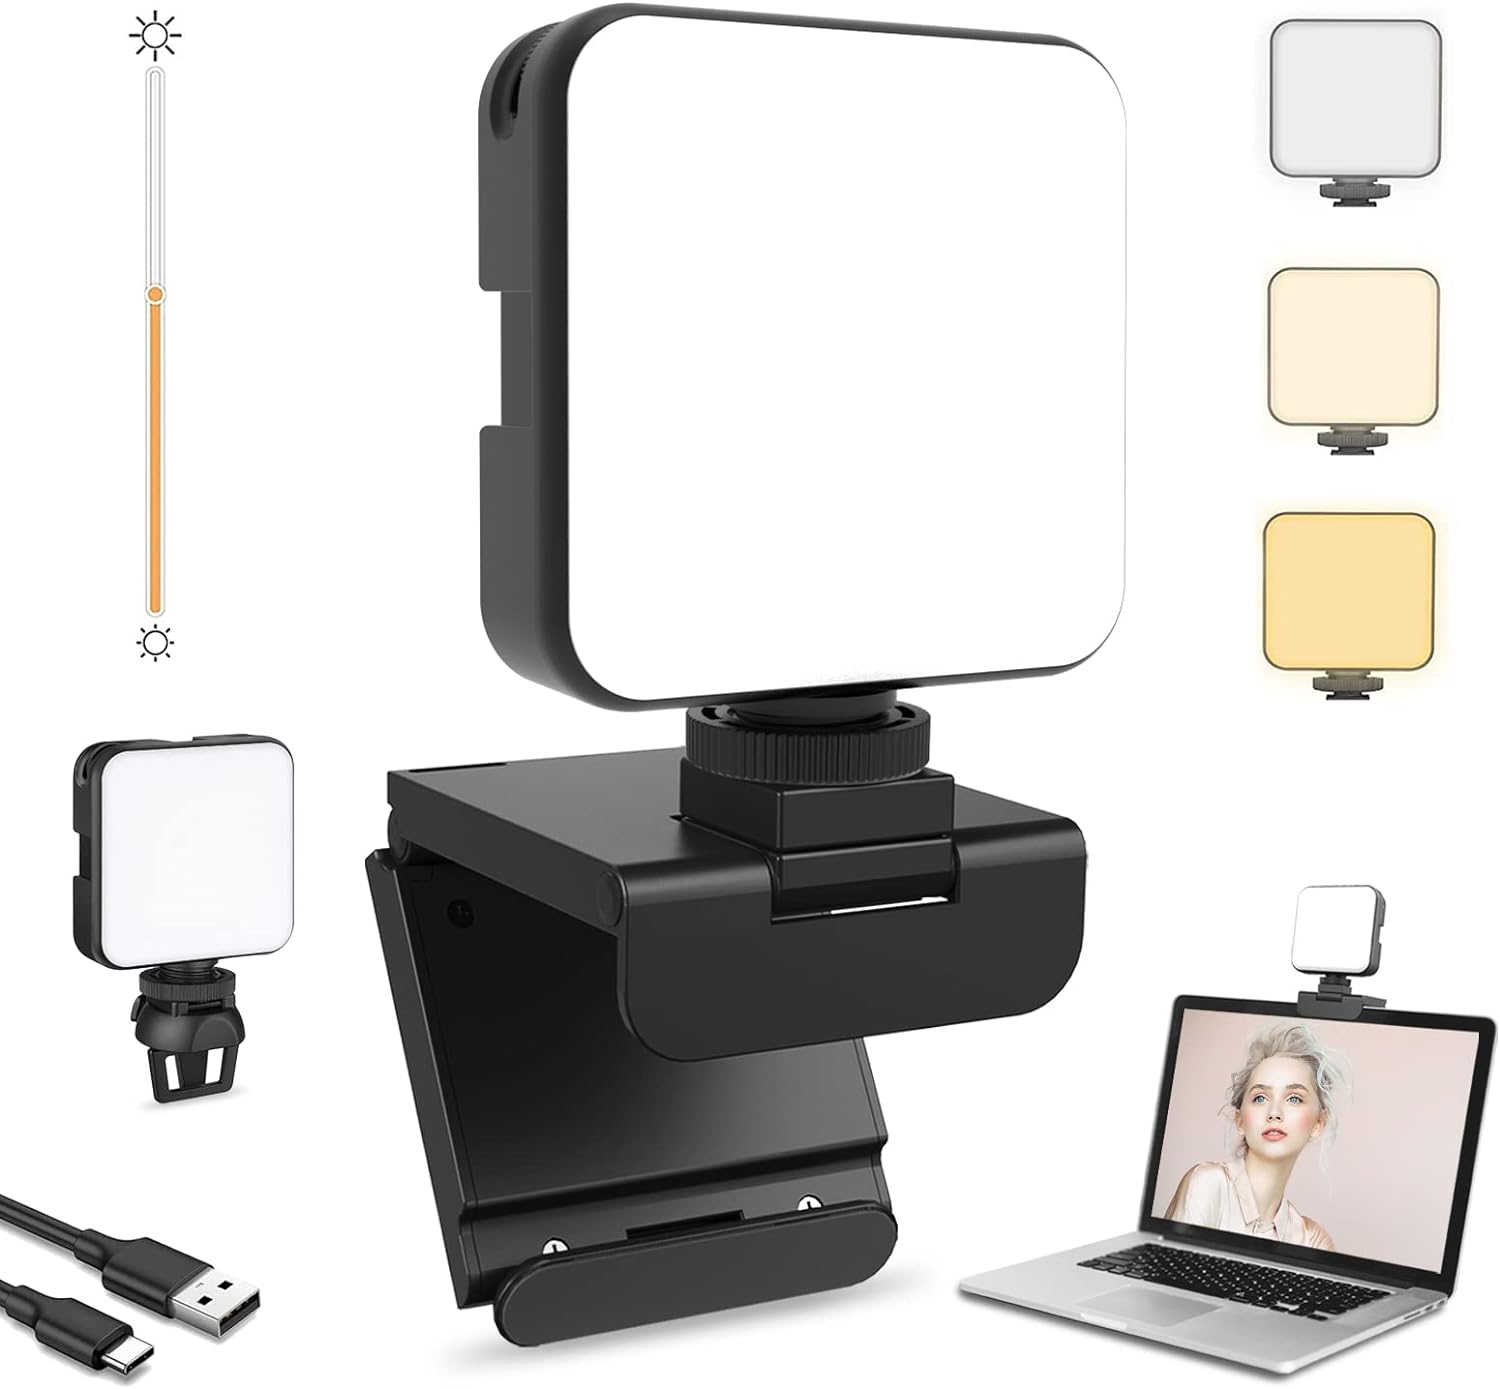 NexiGo Glow Light for Streamers, Enhanced Video Conference Lighting Kit with Webcam Style Clip, Built-in Battery, Dimmable  Rechargeable, for Streaming, Photography, Vlogging